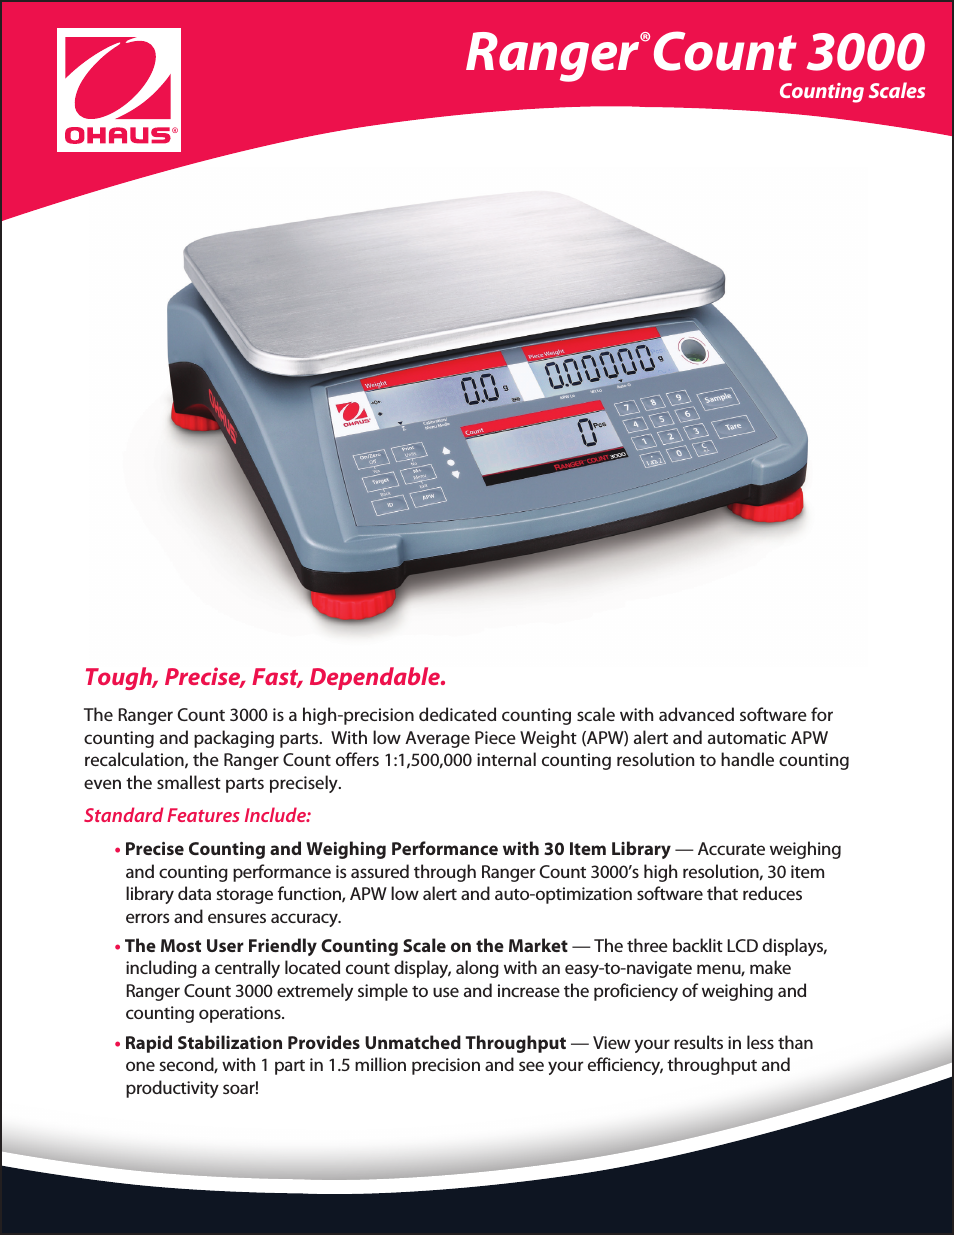 RANGER COUNT 3000 COMPACT COUNTING SCALES Data Sheet